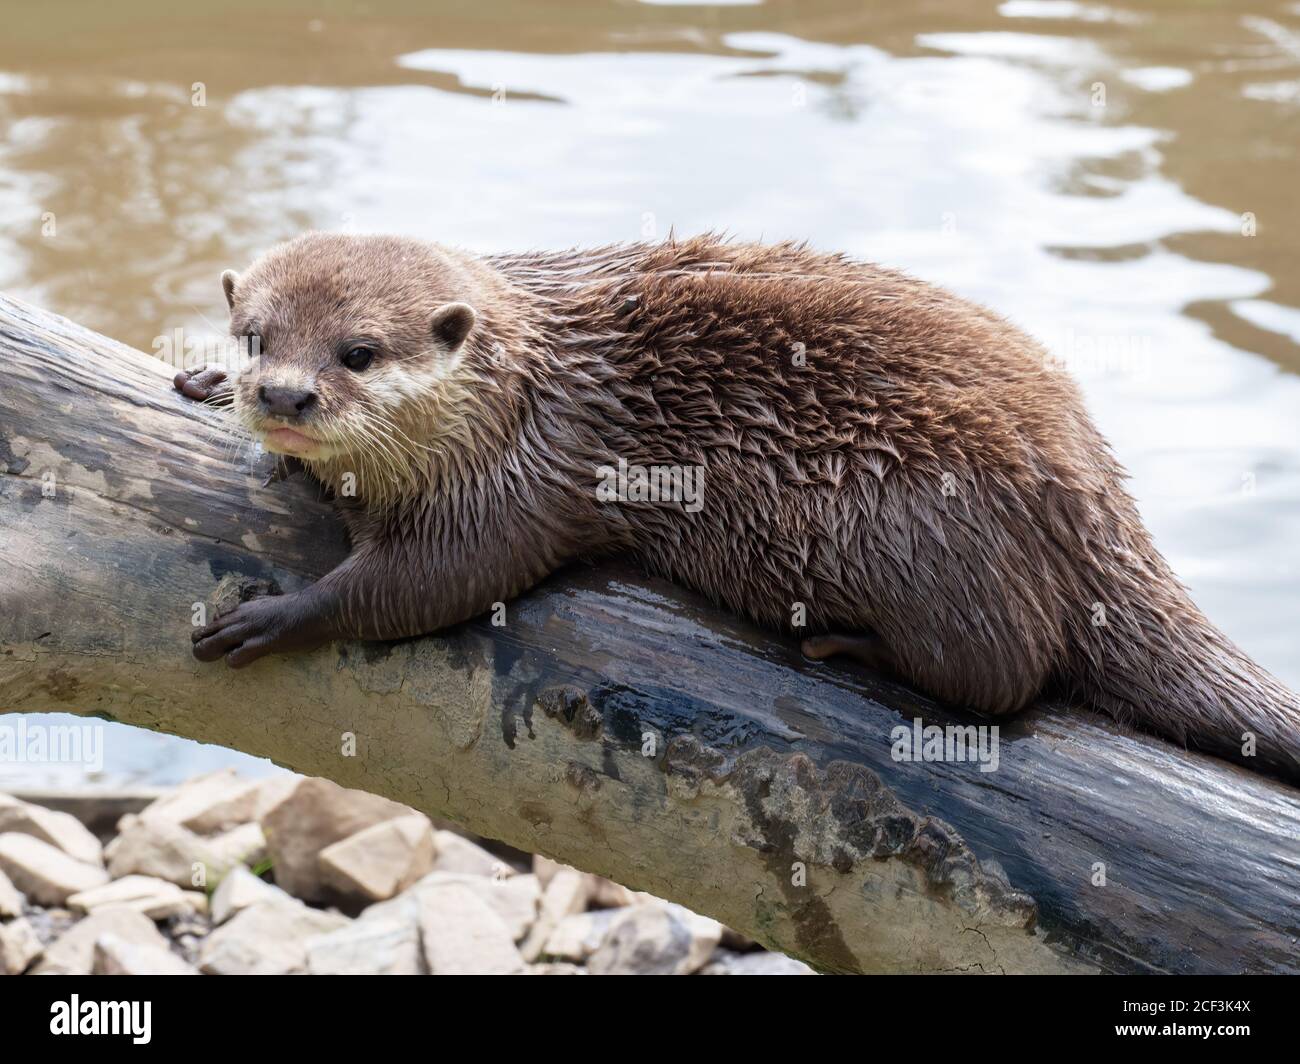 Asian Short-clawed Otter, Aonyx Cinerea, on log by water. Stock Photo